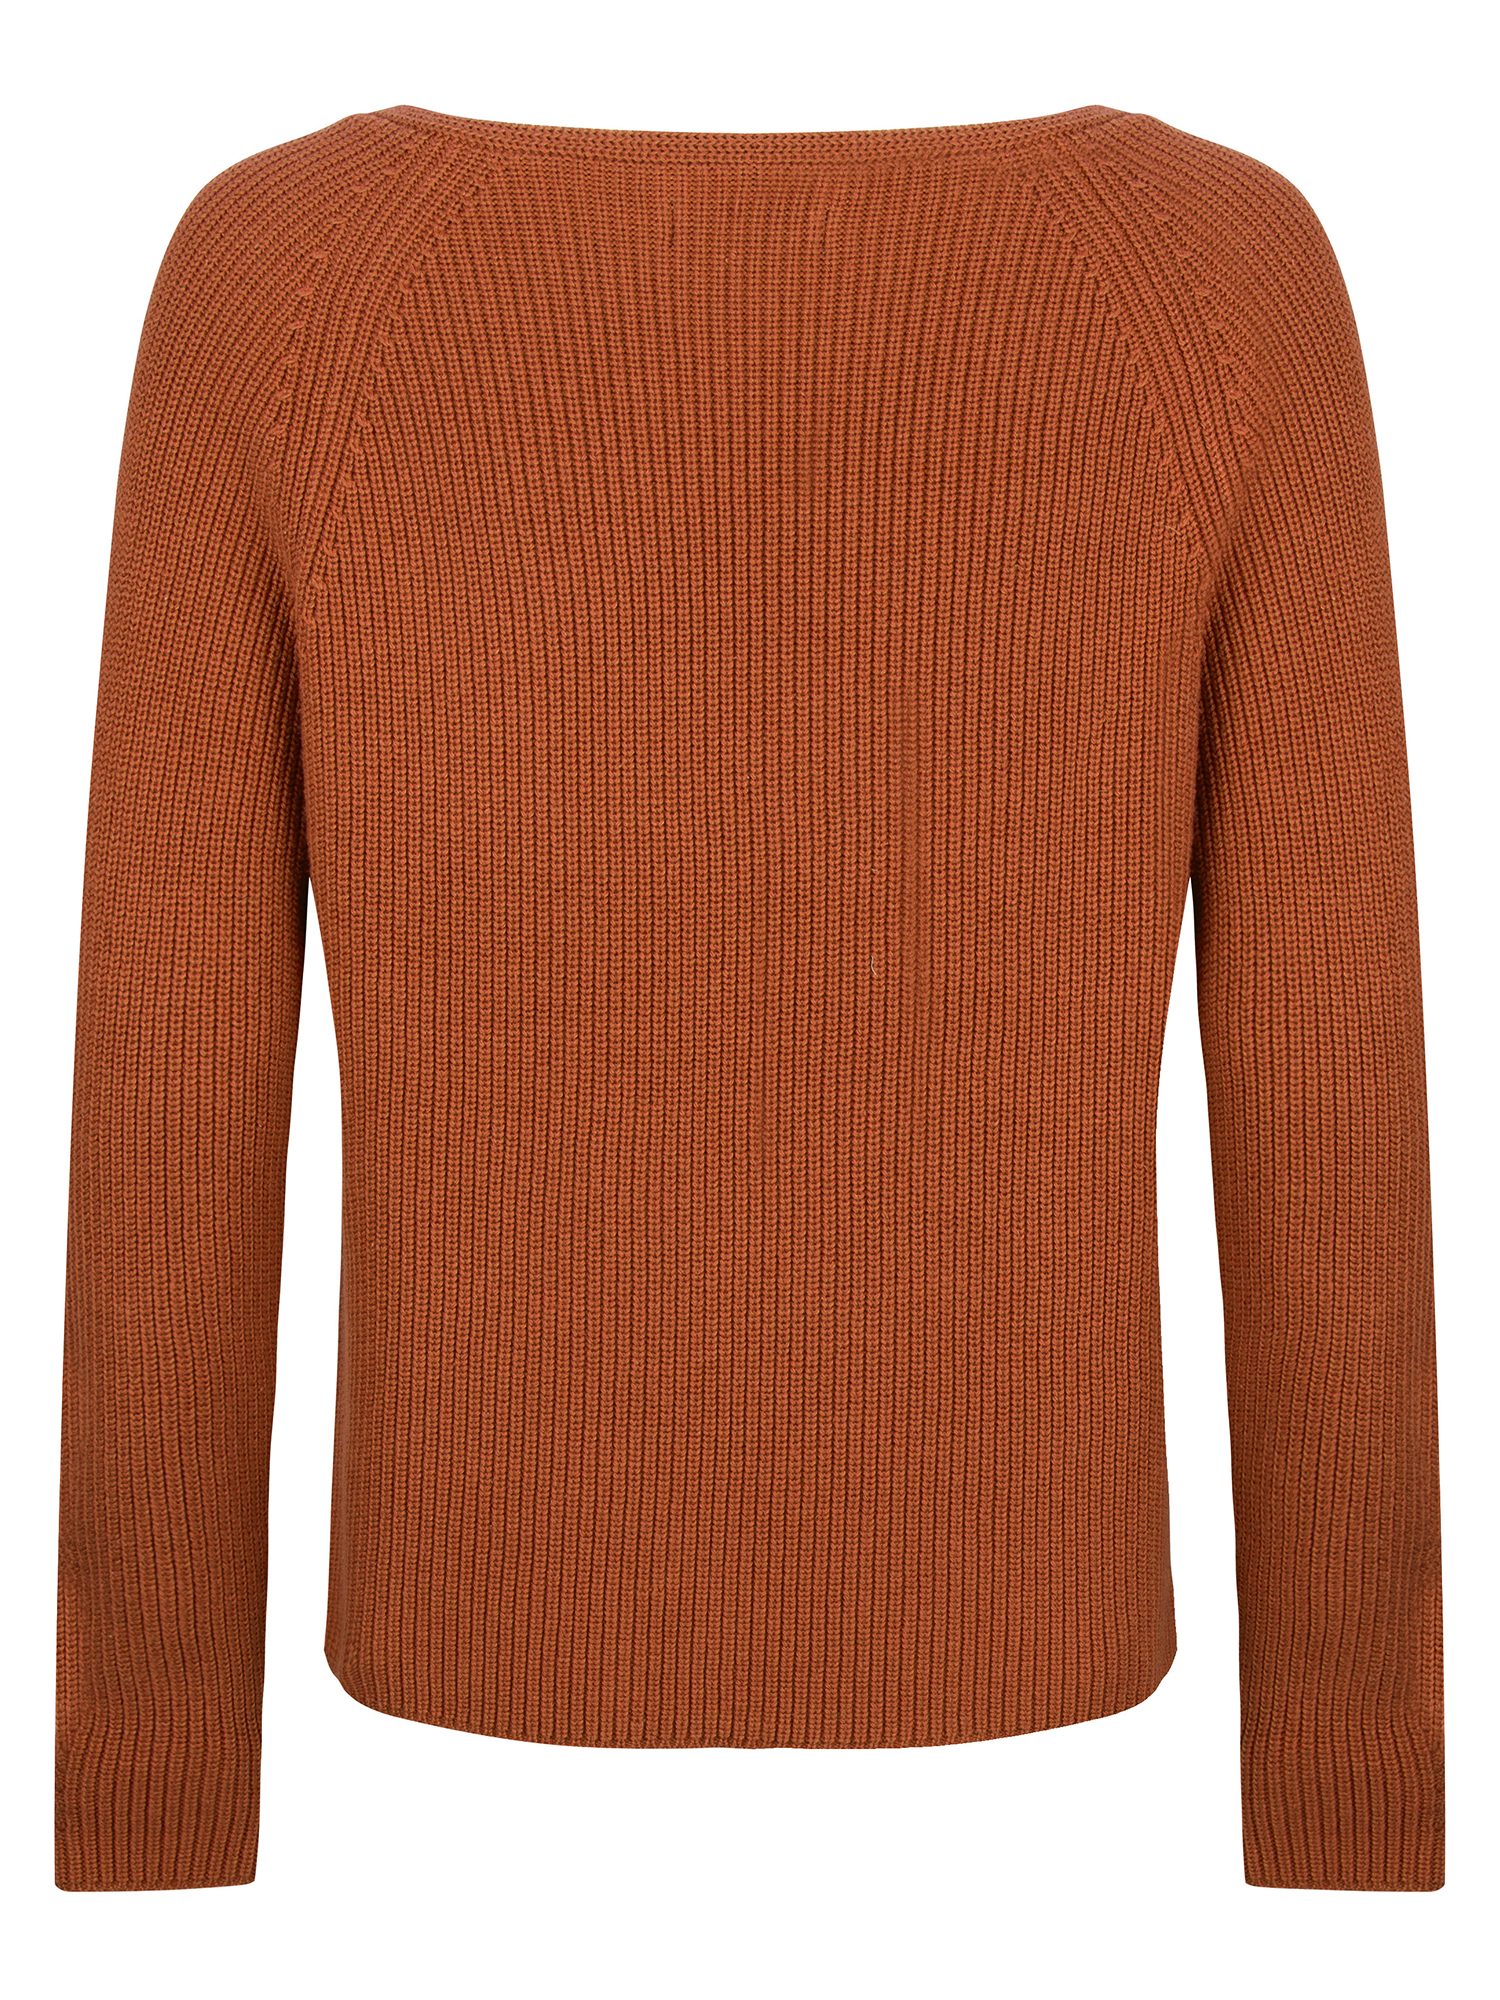 Ydence Knitted Sweater Tess Rust